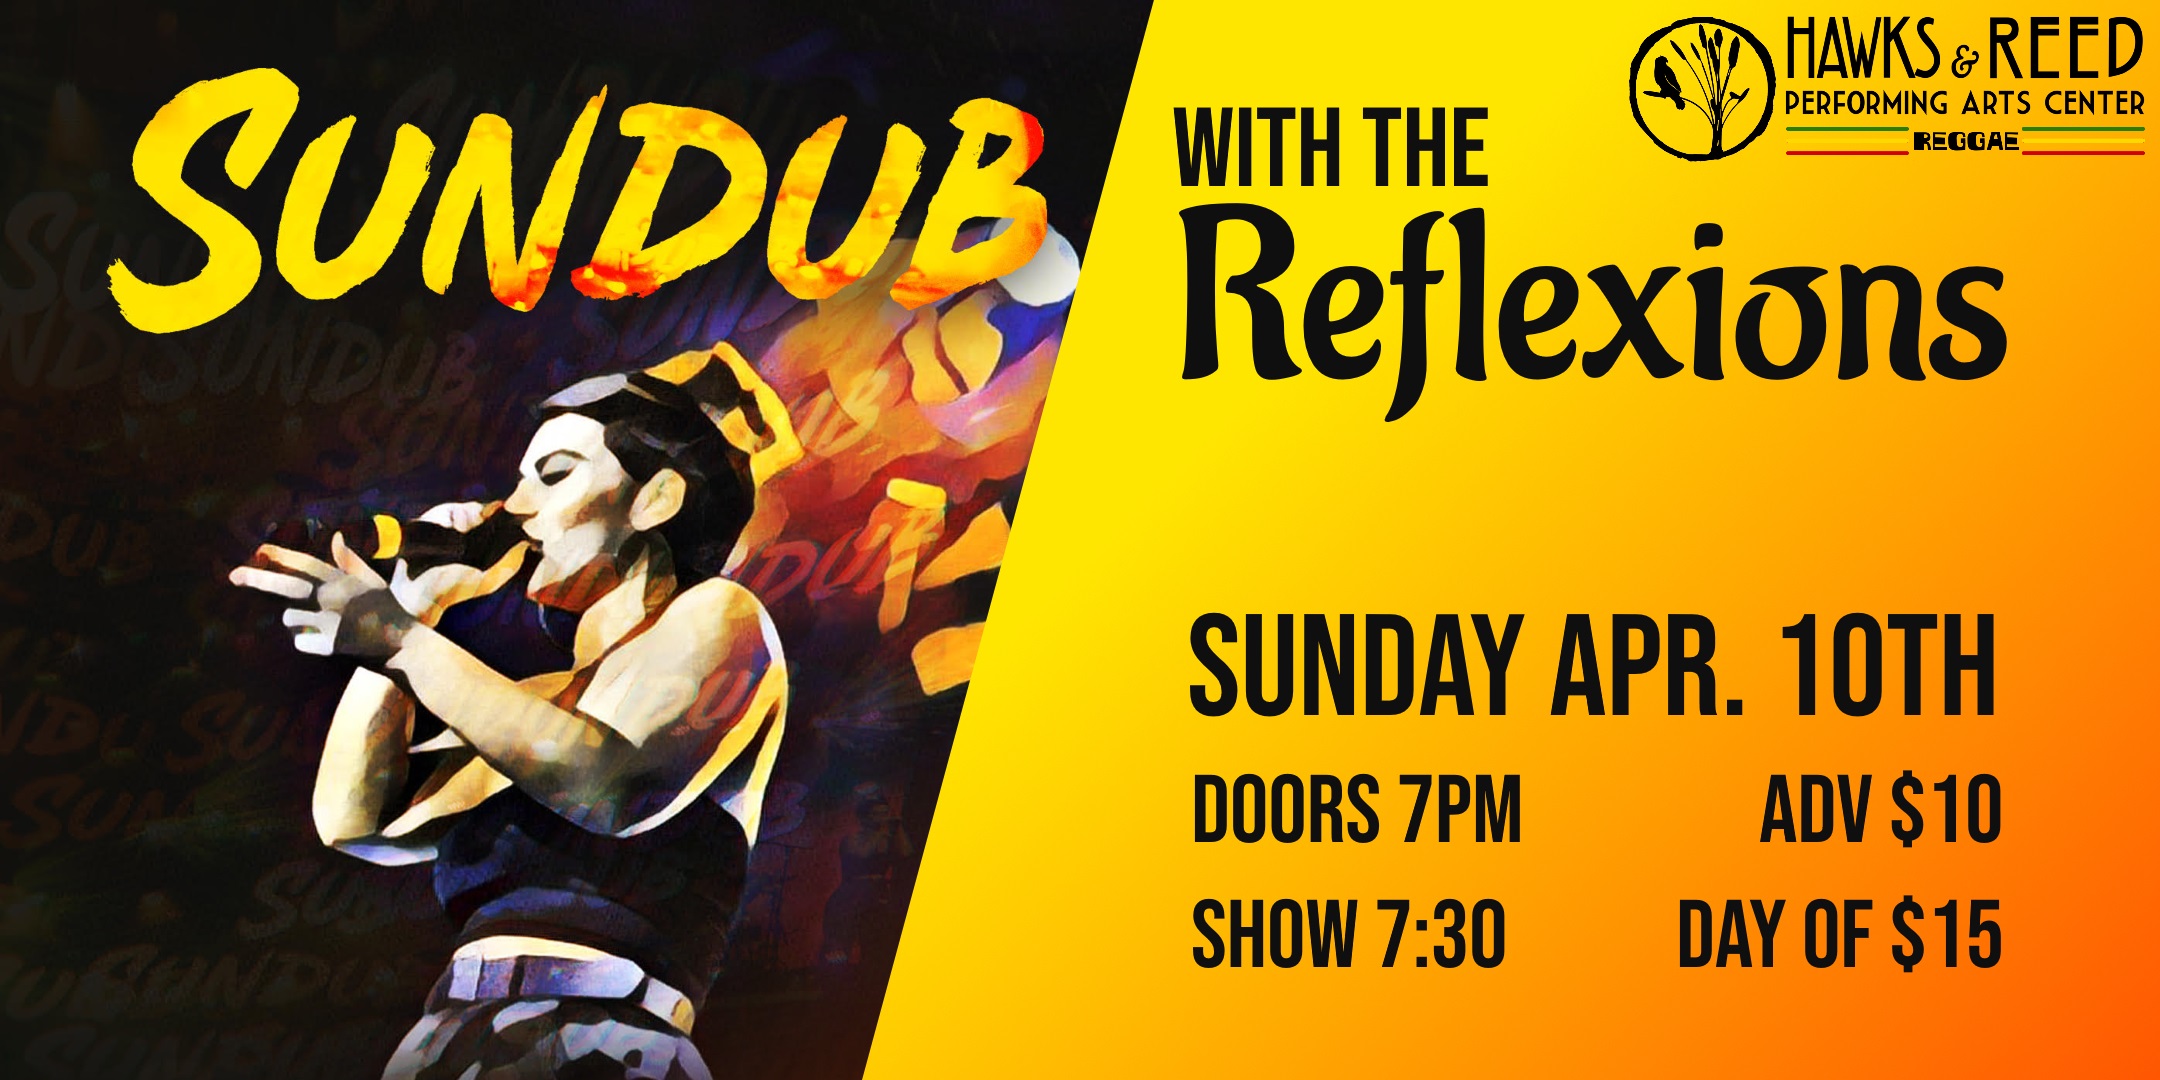 Sundub with The Reflexions at Hawks & Reed